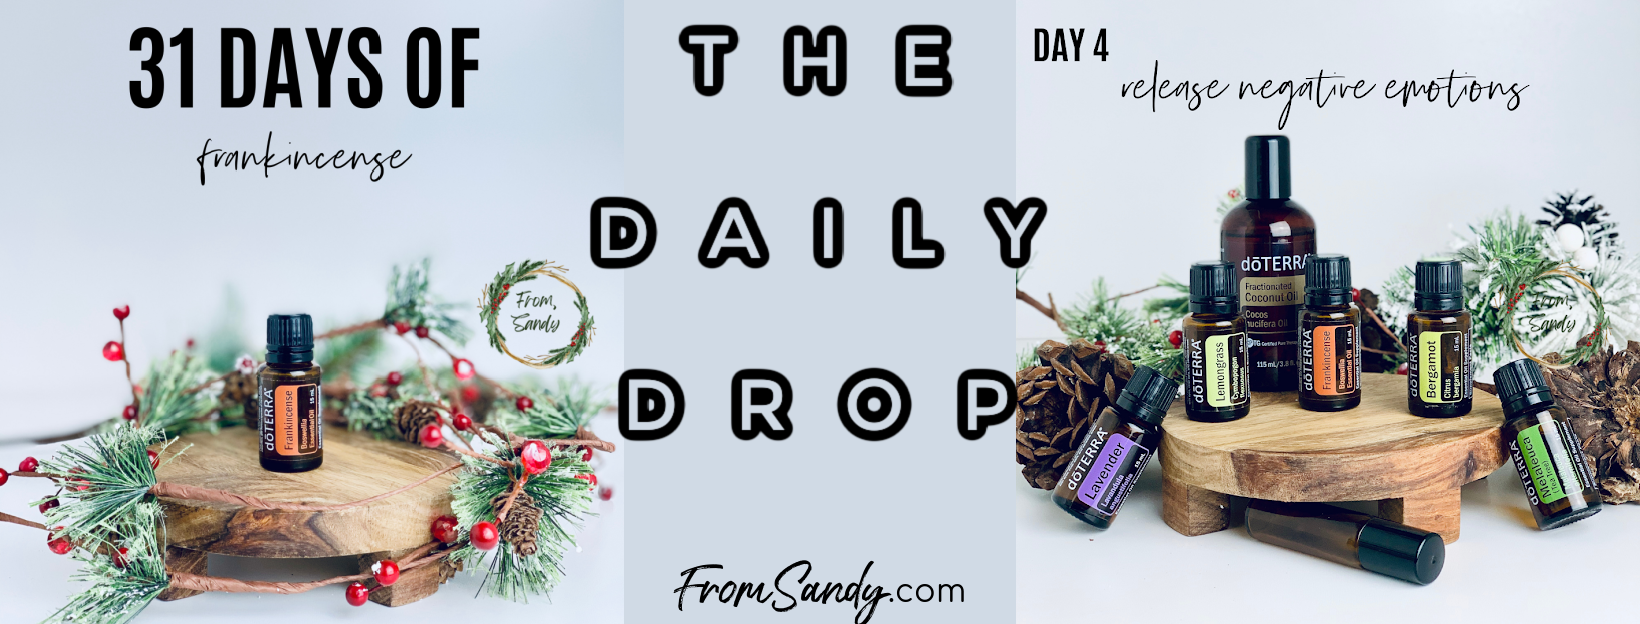 Release Negative Emotions (31 Days of Frankincense: Day 4), From Sandy